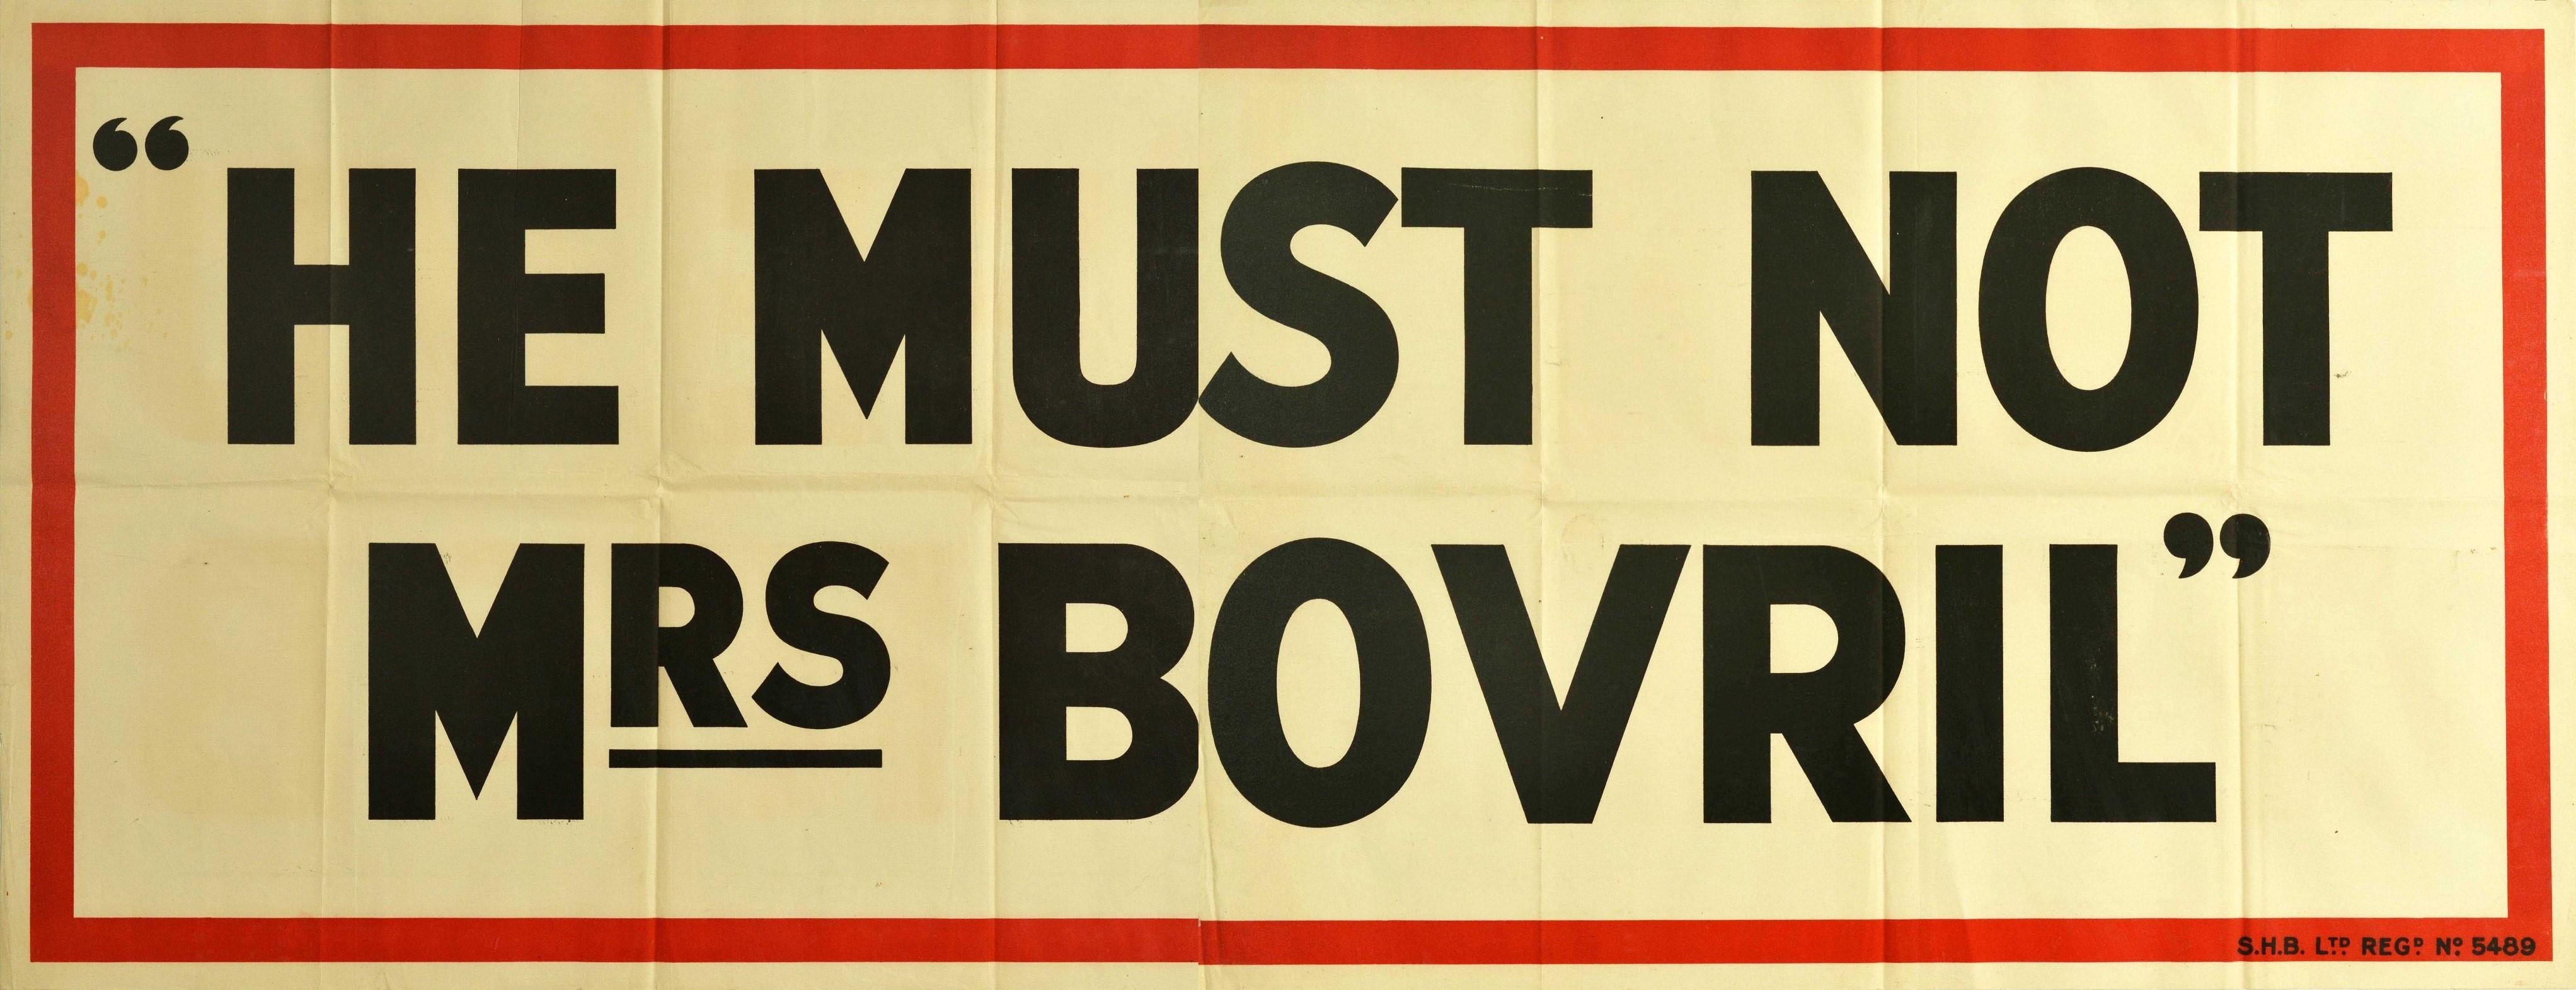 British Original Vintage Poster He Must Not Mrs Bovril Word Play Pun Drink Food Campaign For Sale